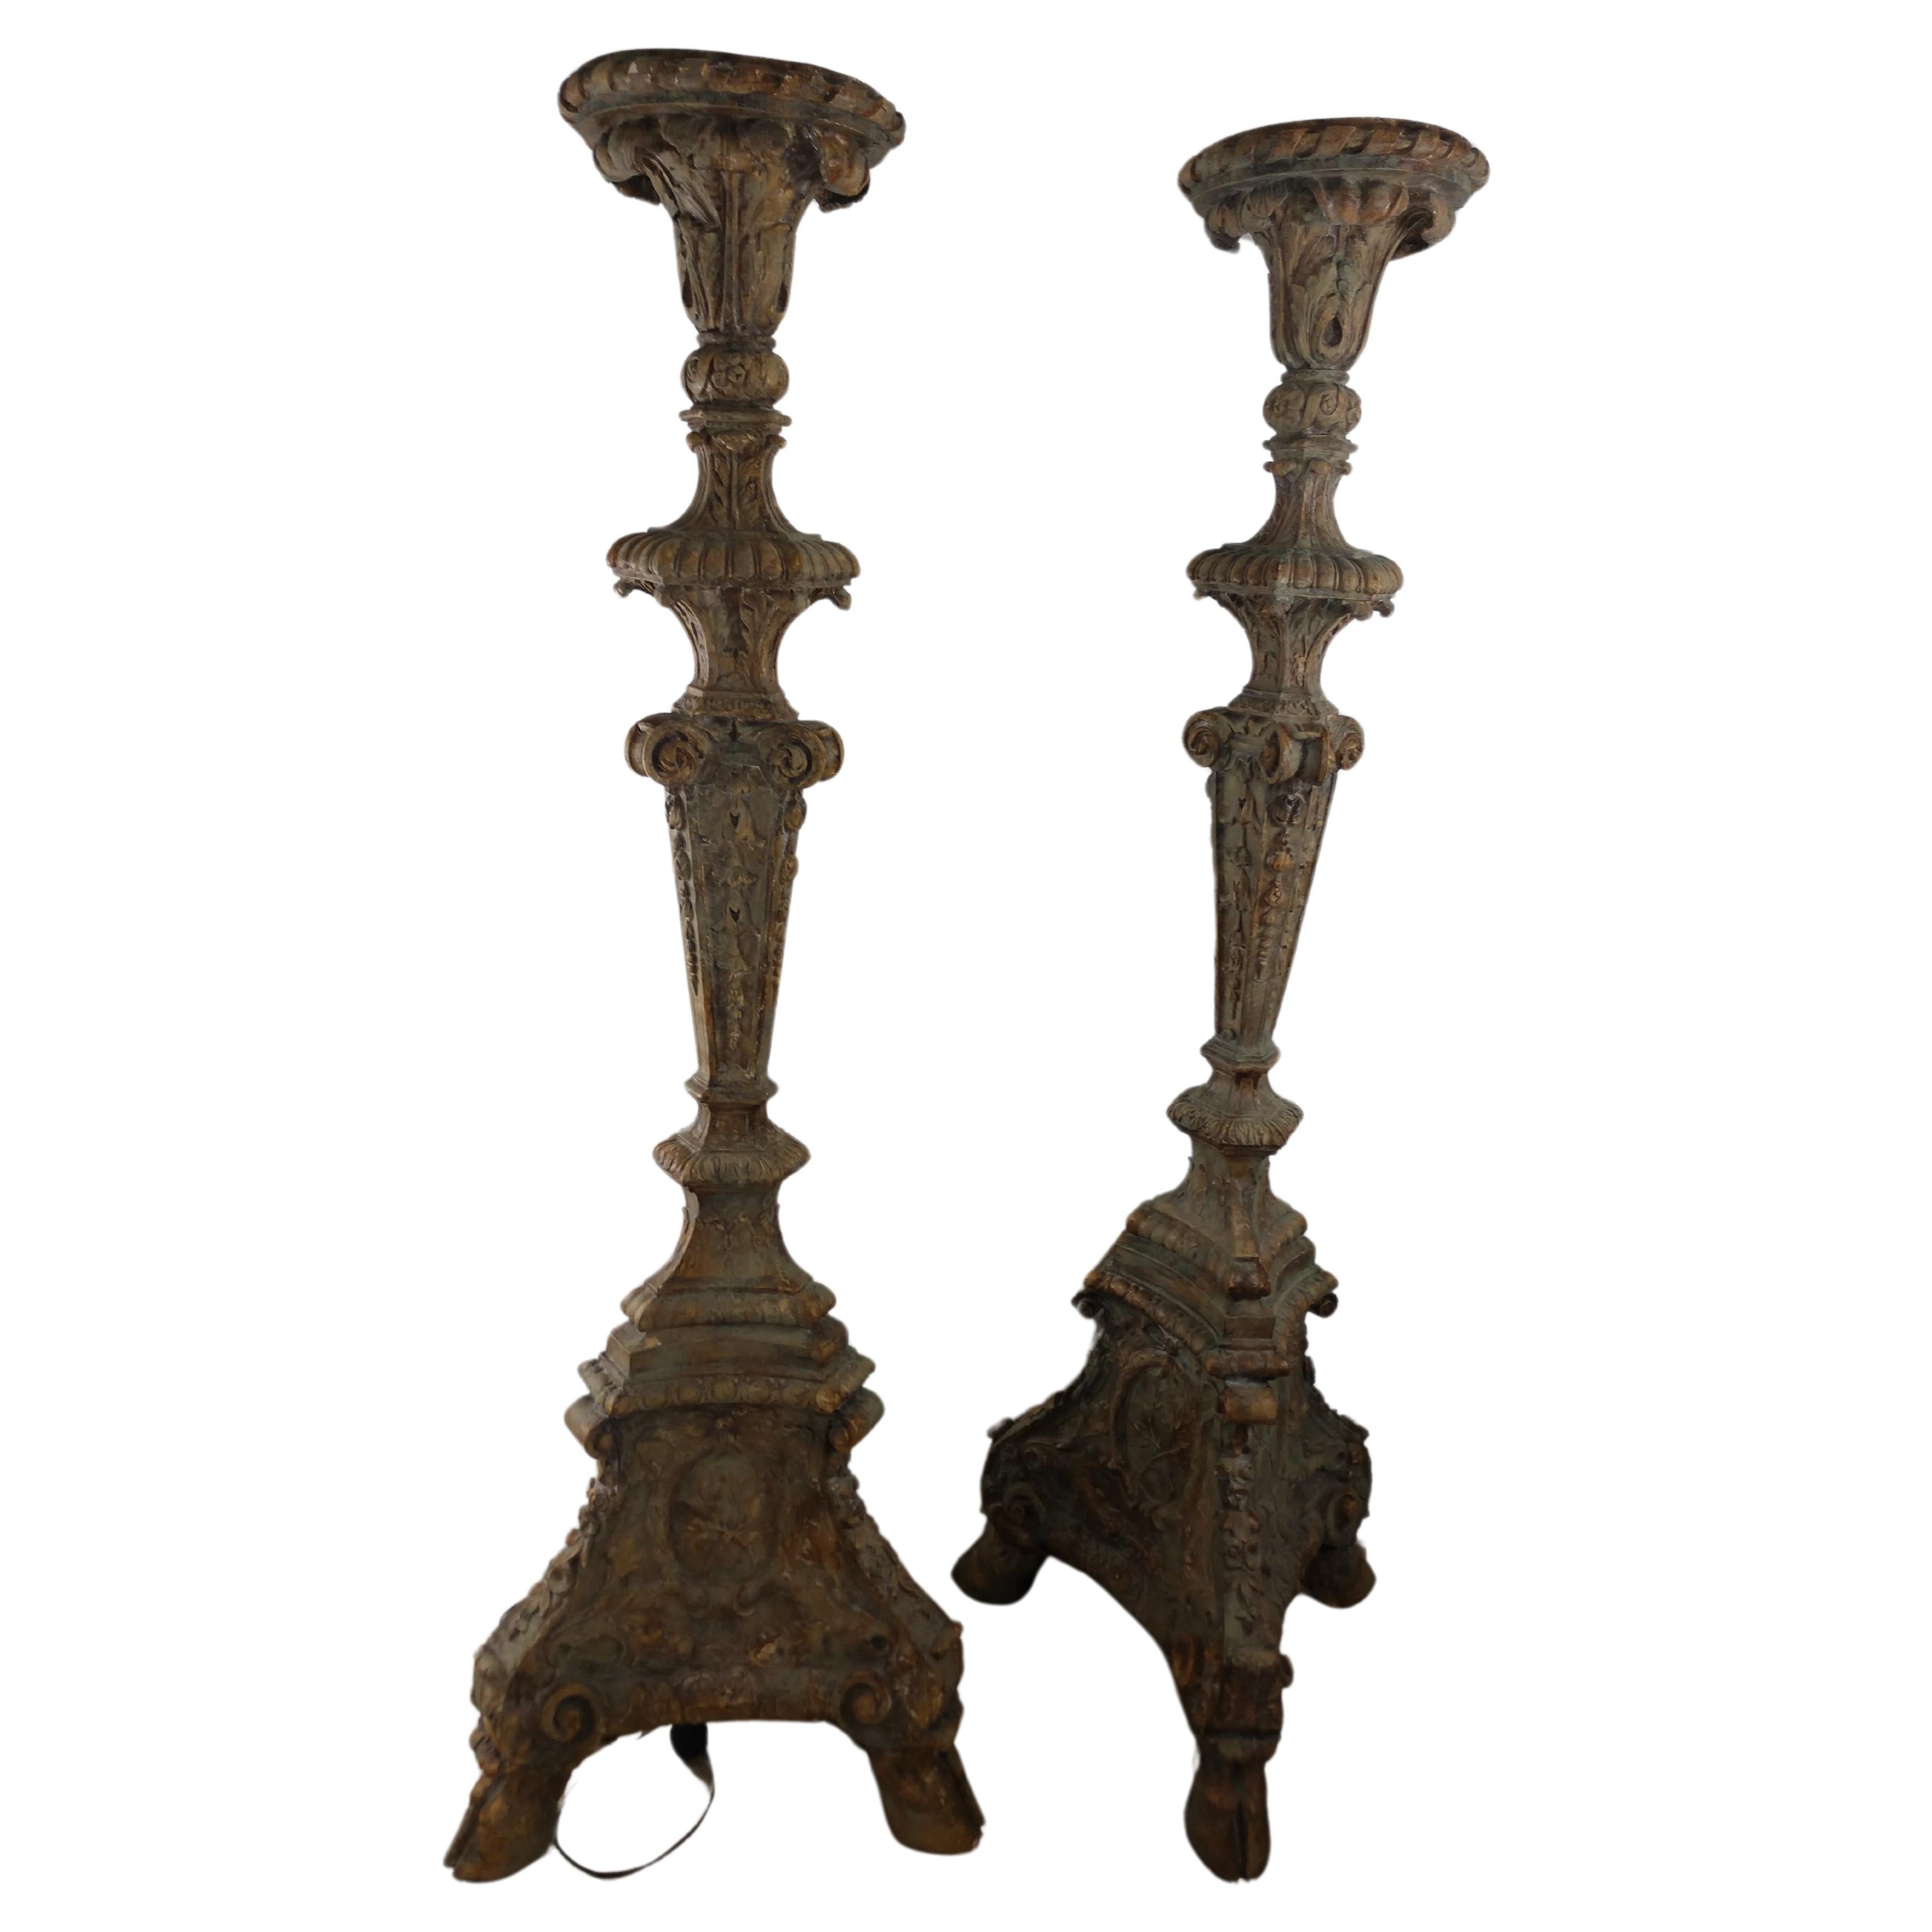 Hand-Painted Pair of Monumental 20th Century Gilt Prickett Floor Lamps For Sale